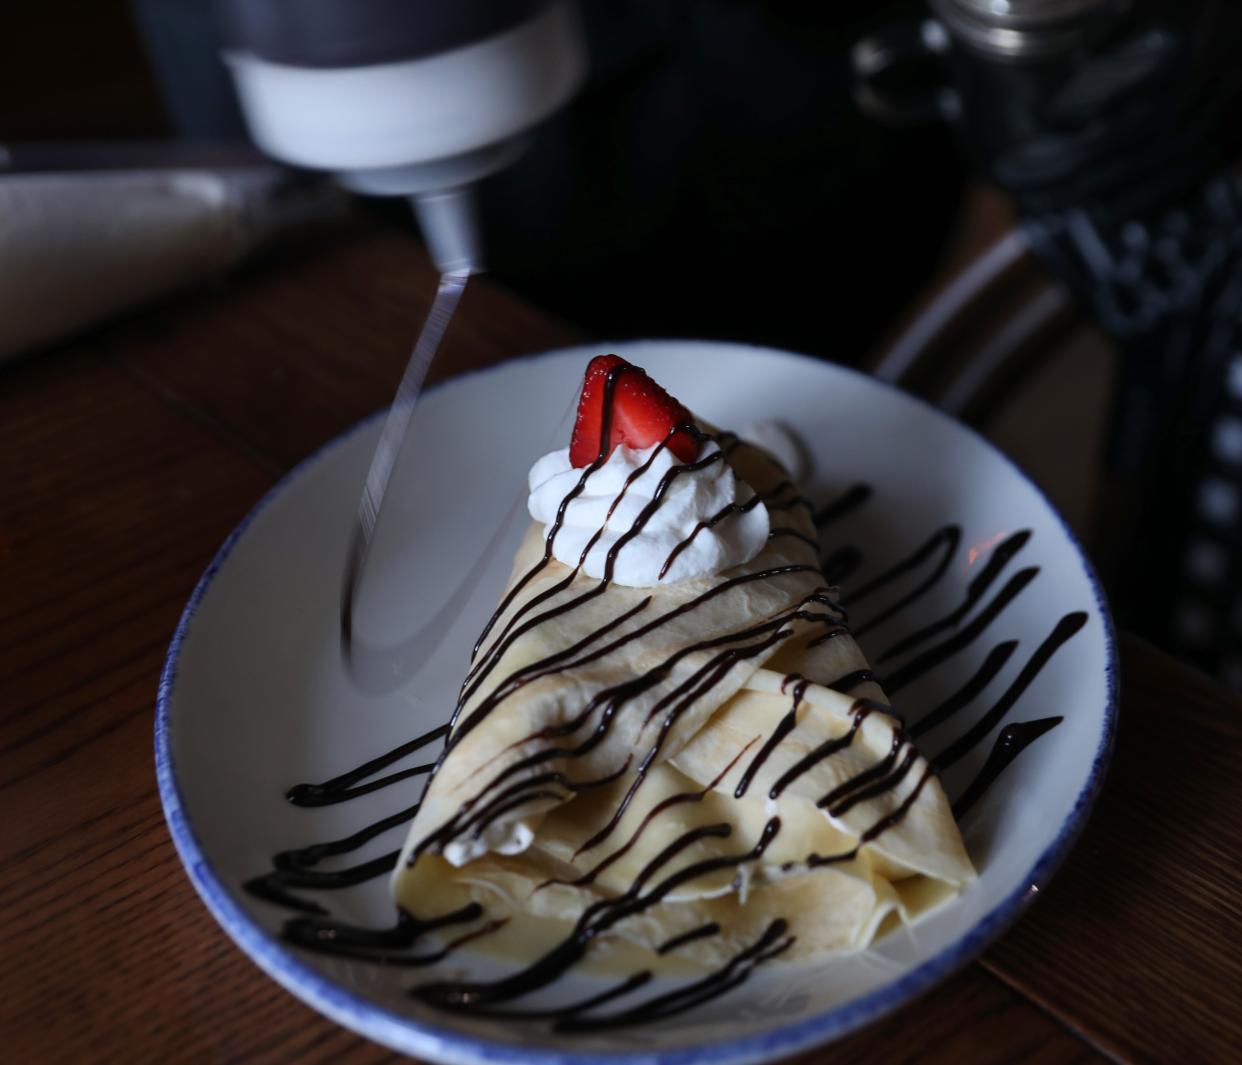 Sous-chef Eddie Durkin adds chocolate sauce as creates a Nutella Fruit Crepe at the opening of the newest Simply Crepes located in Penfield Monday, Oct. 10, 2022. 